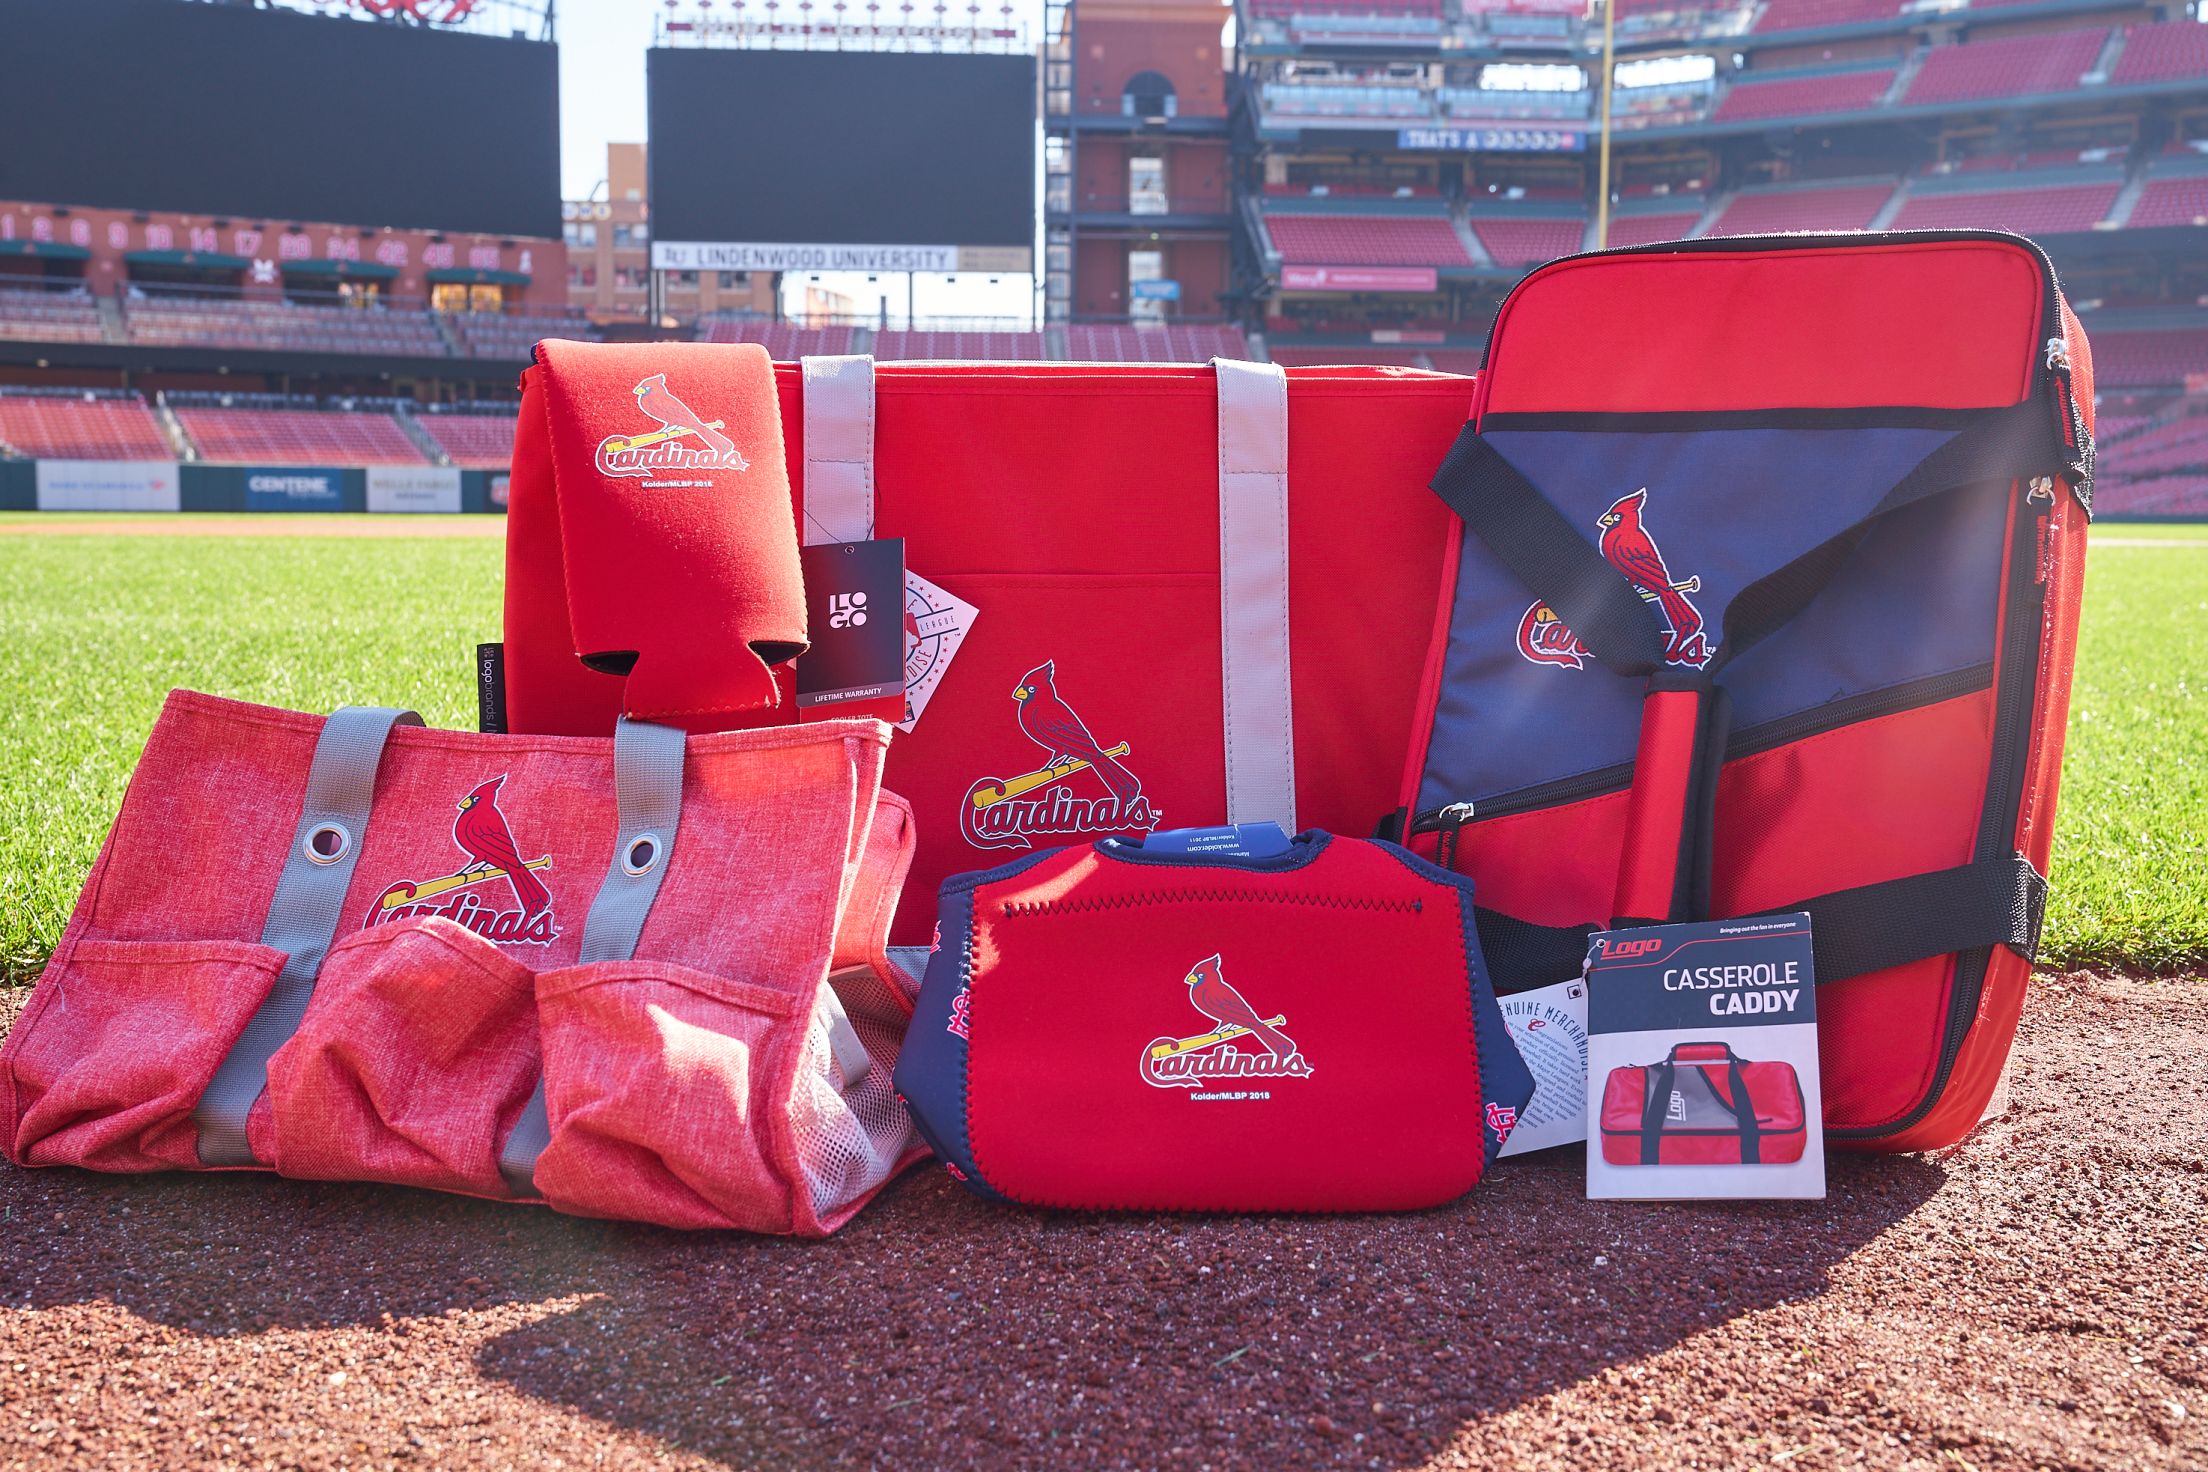 St. Louis Cardinals on Twitter  Wine tasting gift, Gifts, Free gifts